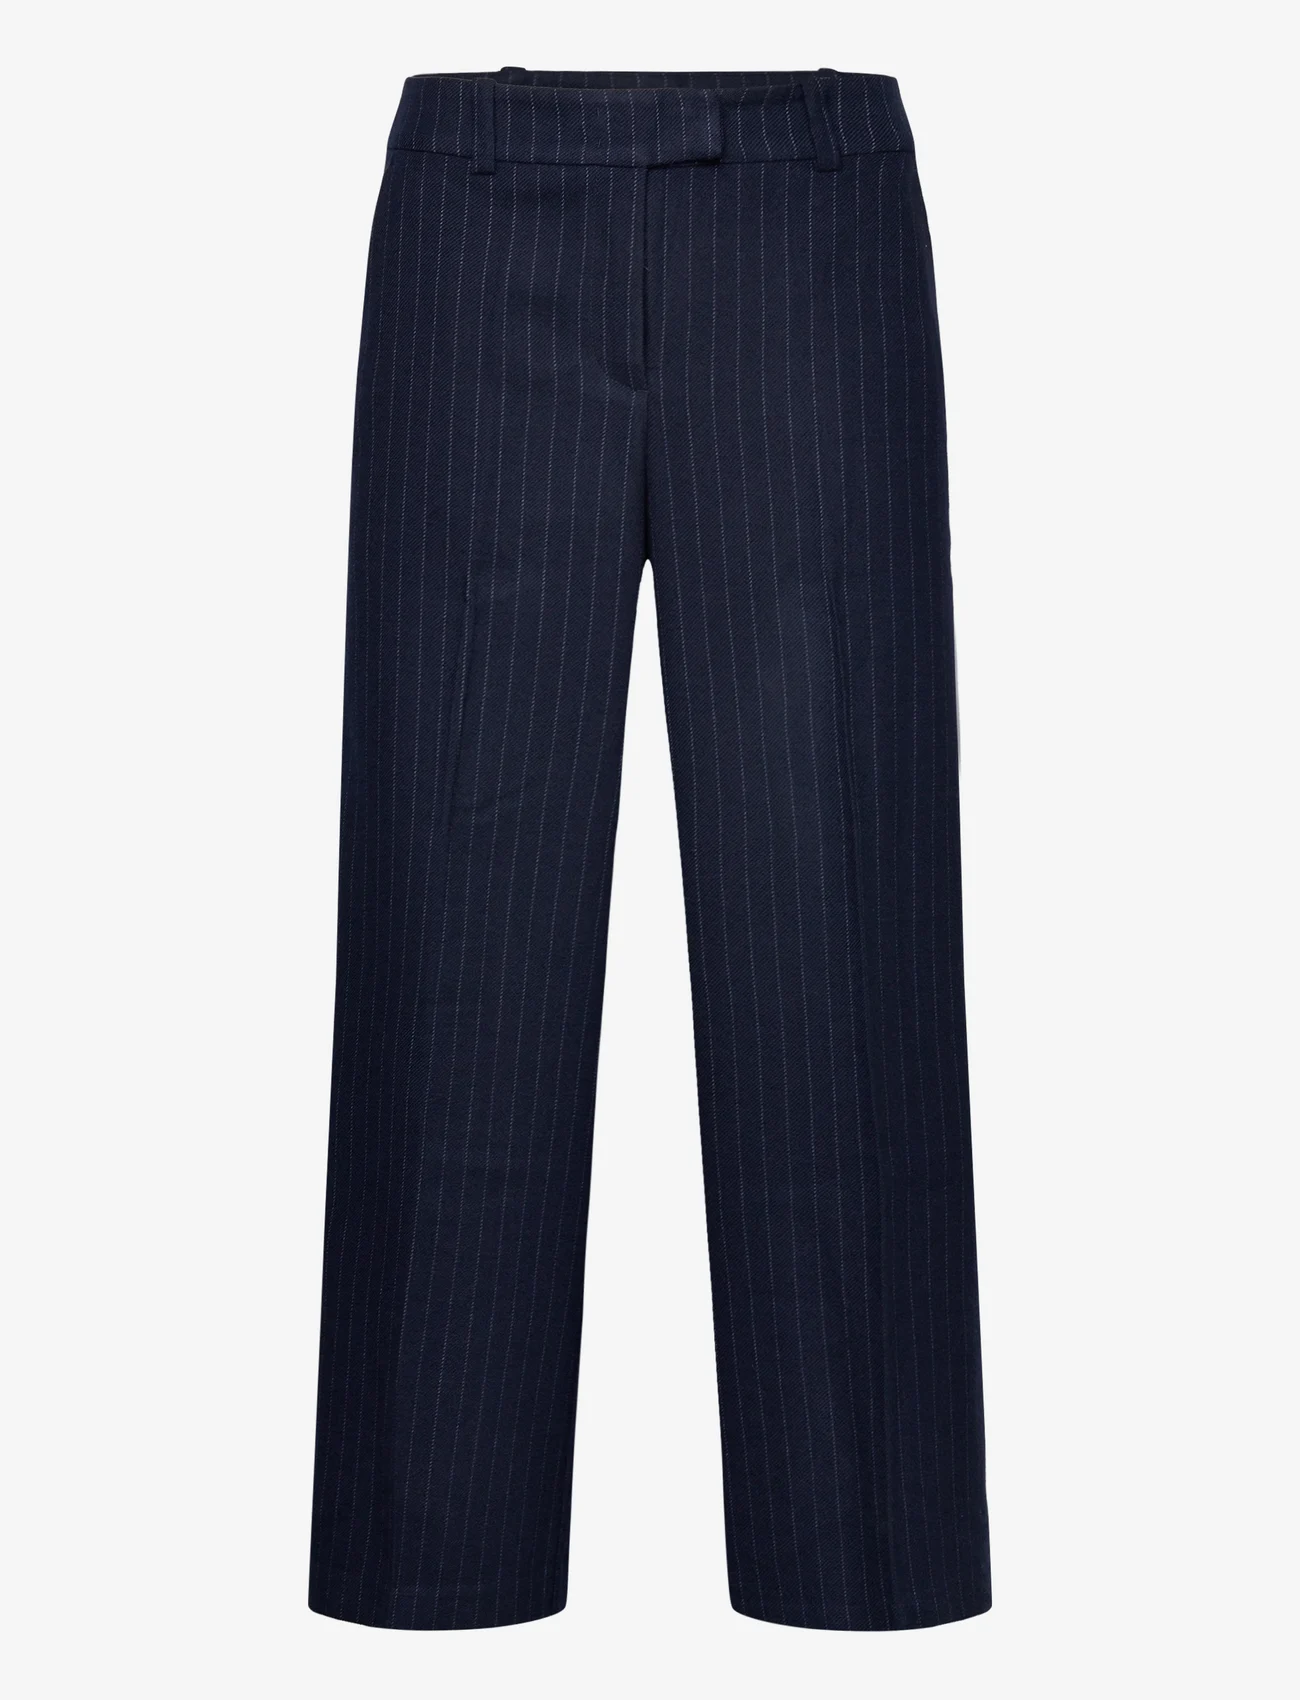 Tom Tailor - Tom Tailor Lea straight - tailored trousers - navy pinstripe - 0